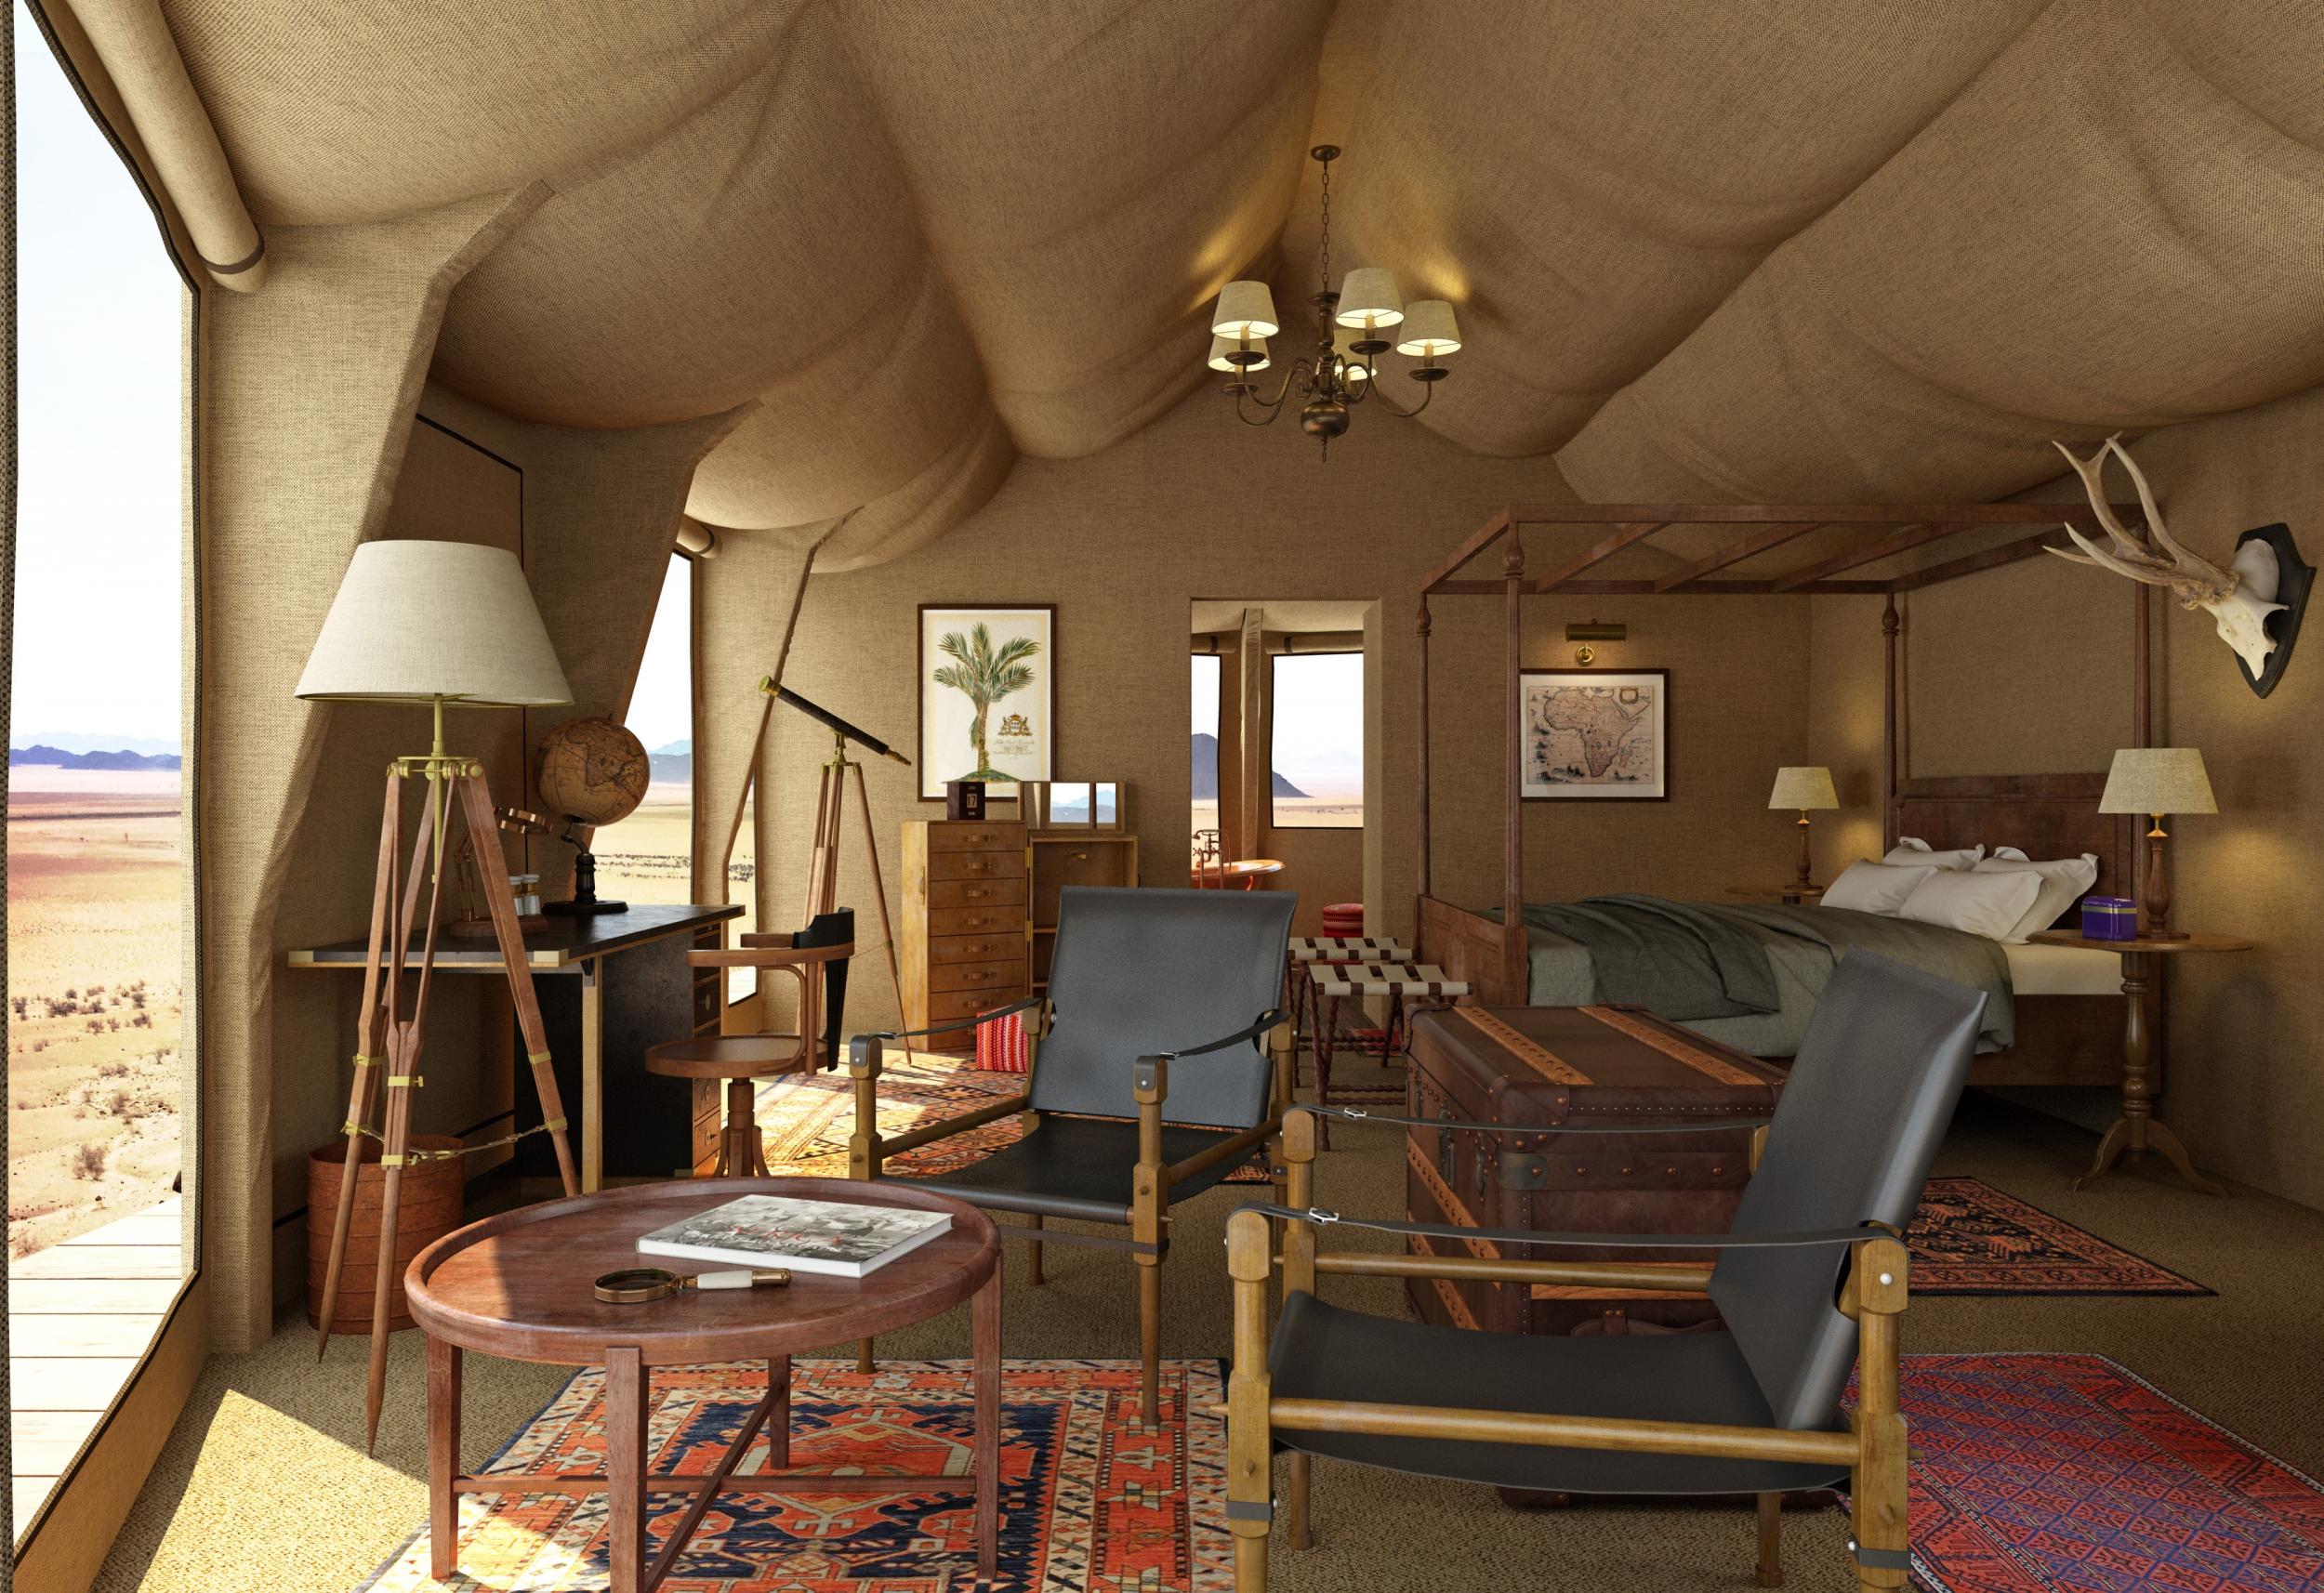 Sonop lodge in Namibia has four poster beds and copper bathtubs